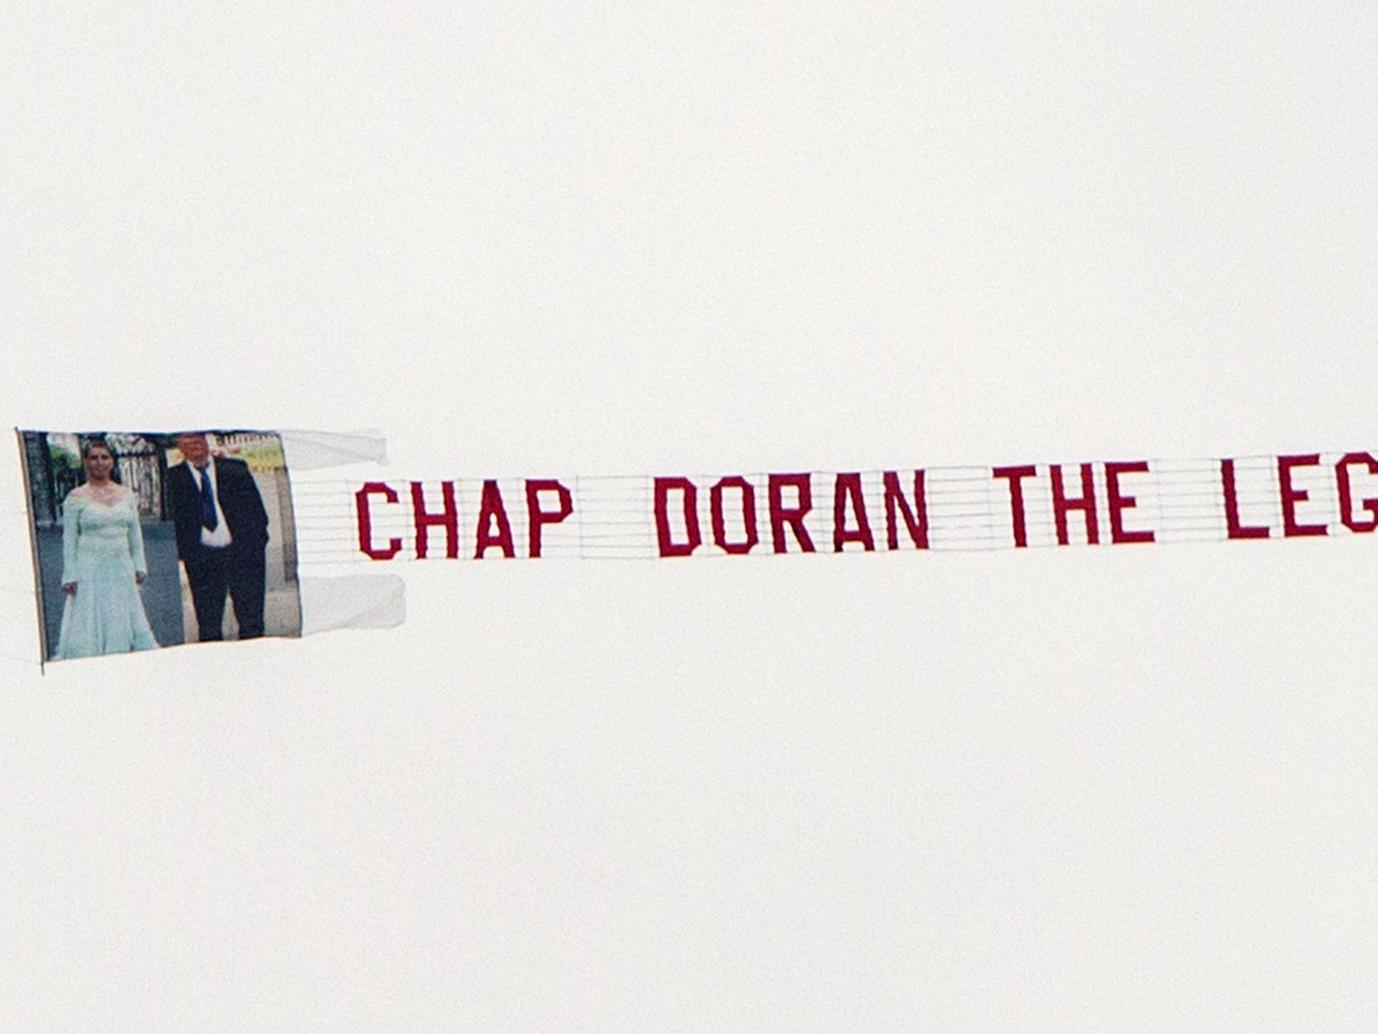 "Chap Doran the legend" was written on flags, the coffin and even on this banner which was flown over Kettering